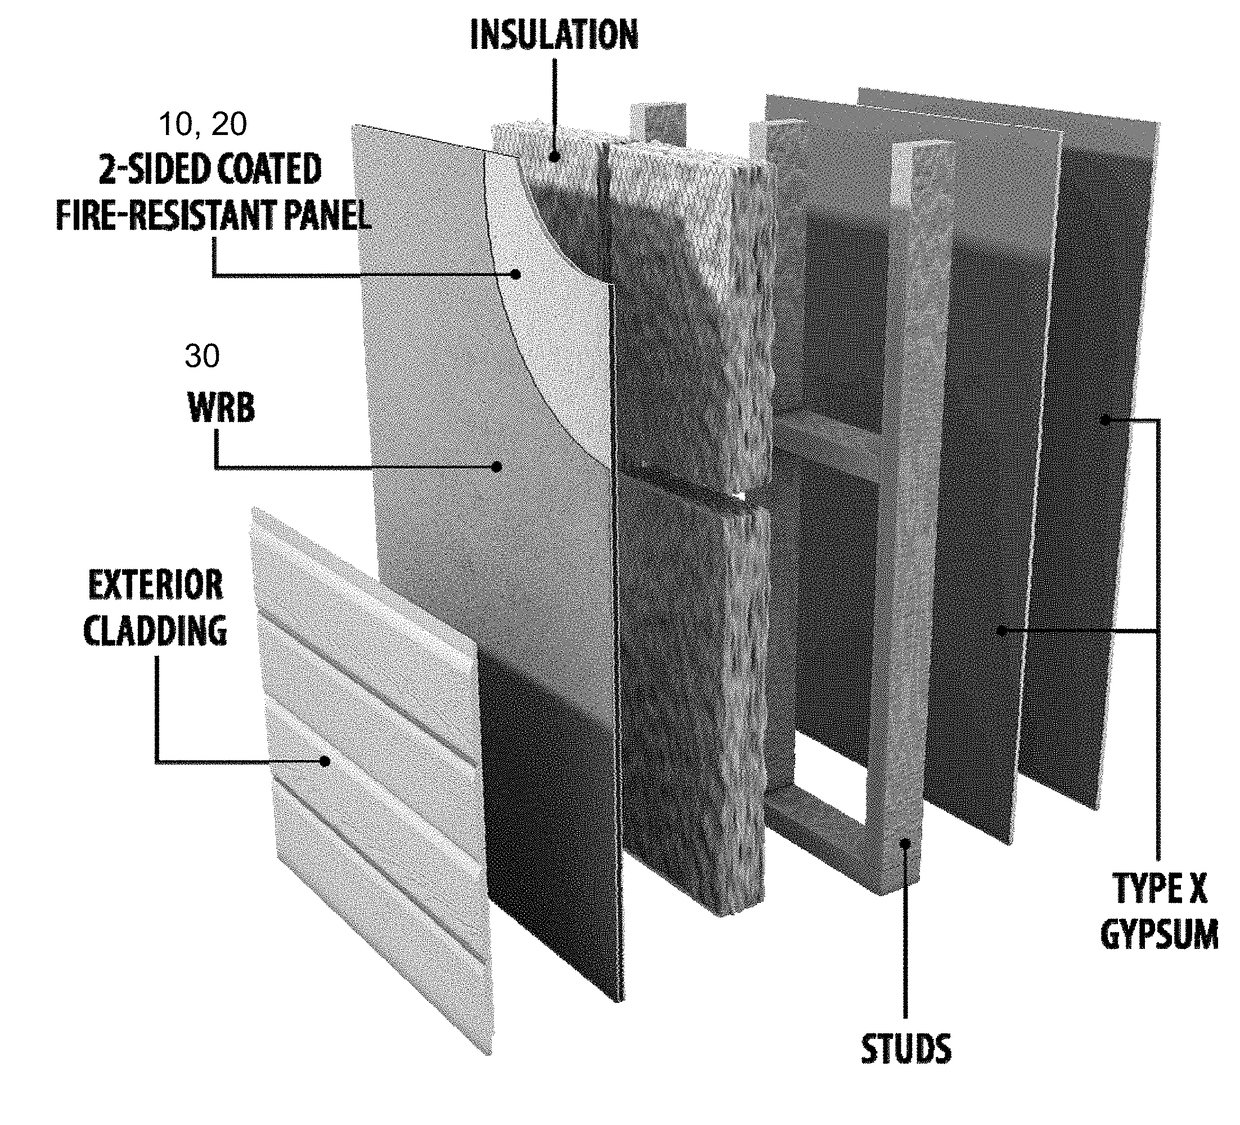 Permeable elastomeric membrane adhered to fire-rated structural osb panels